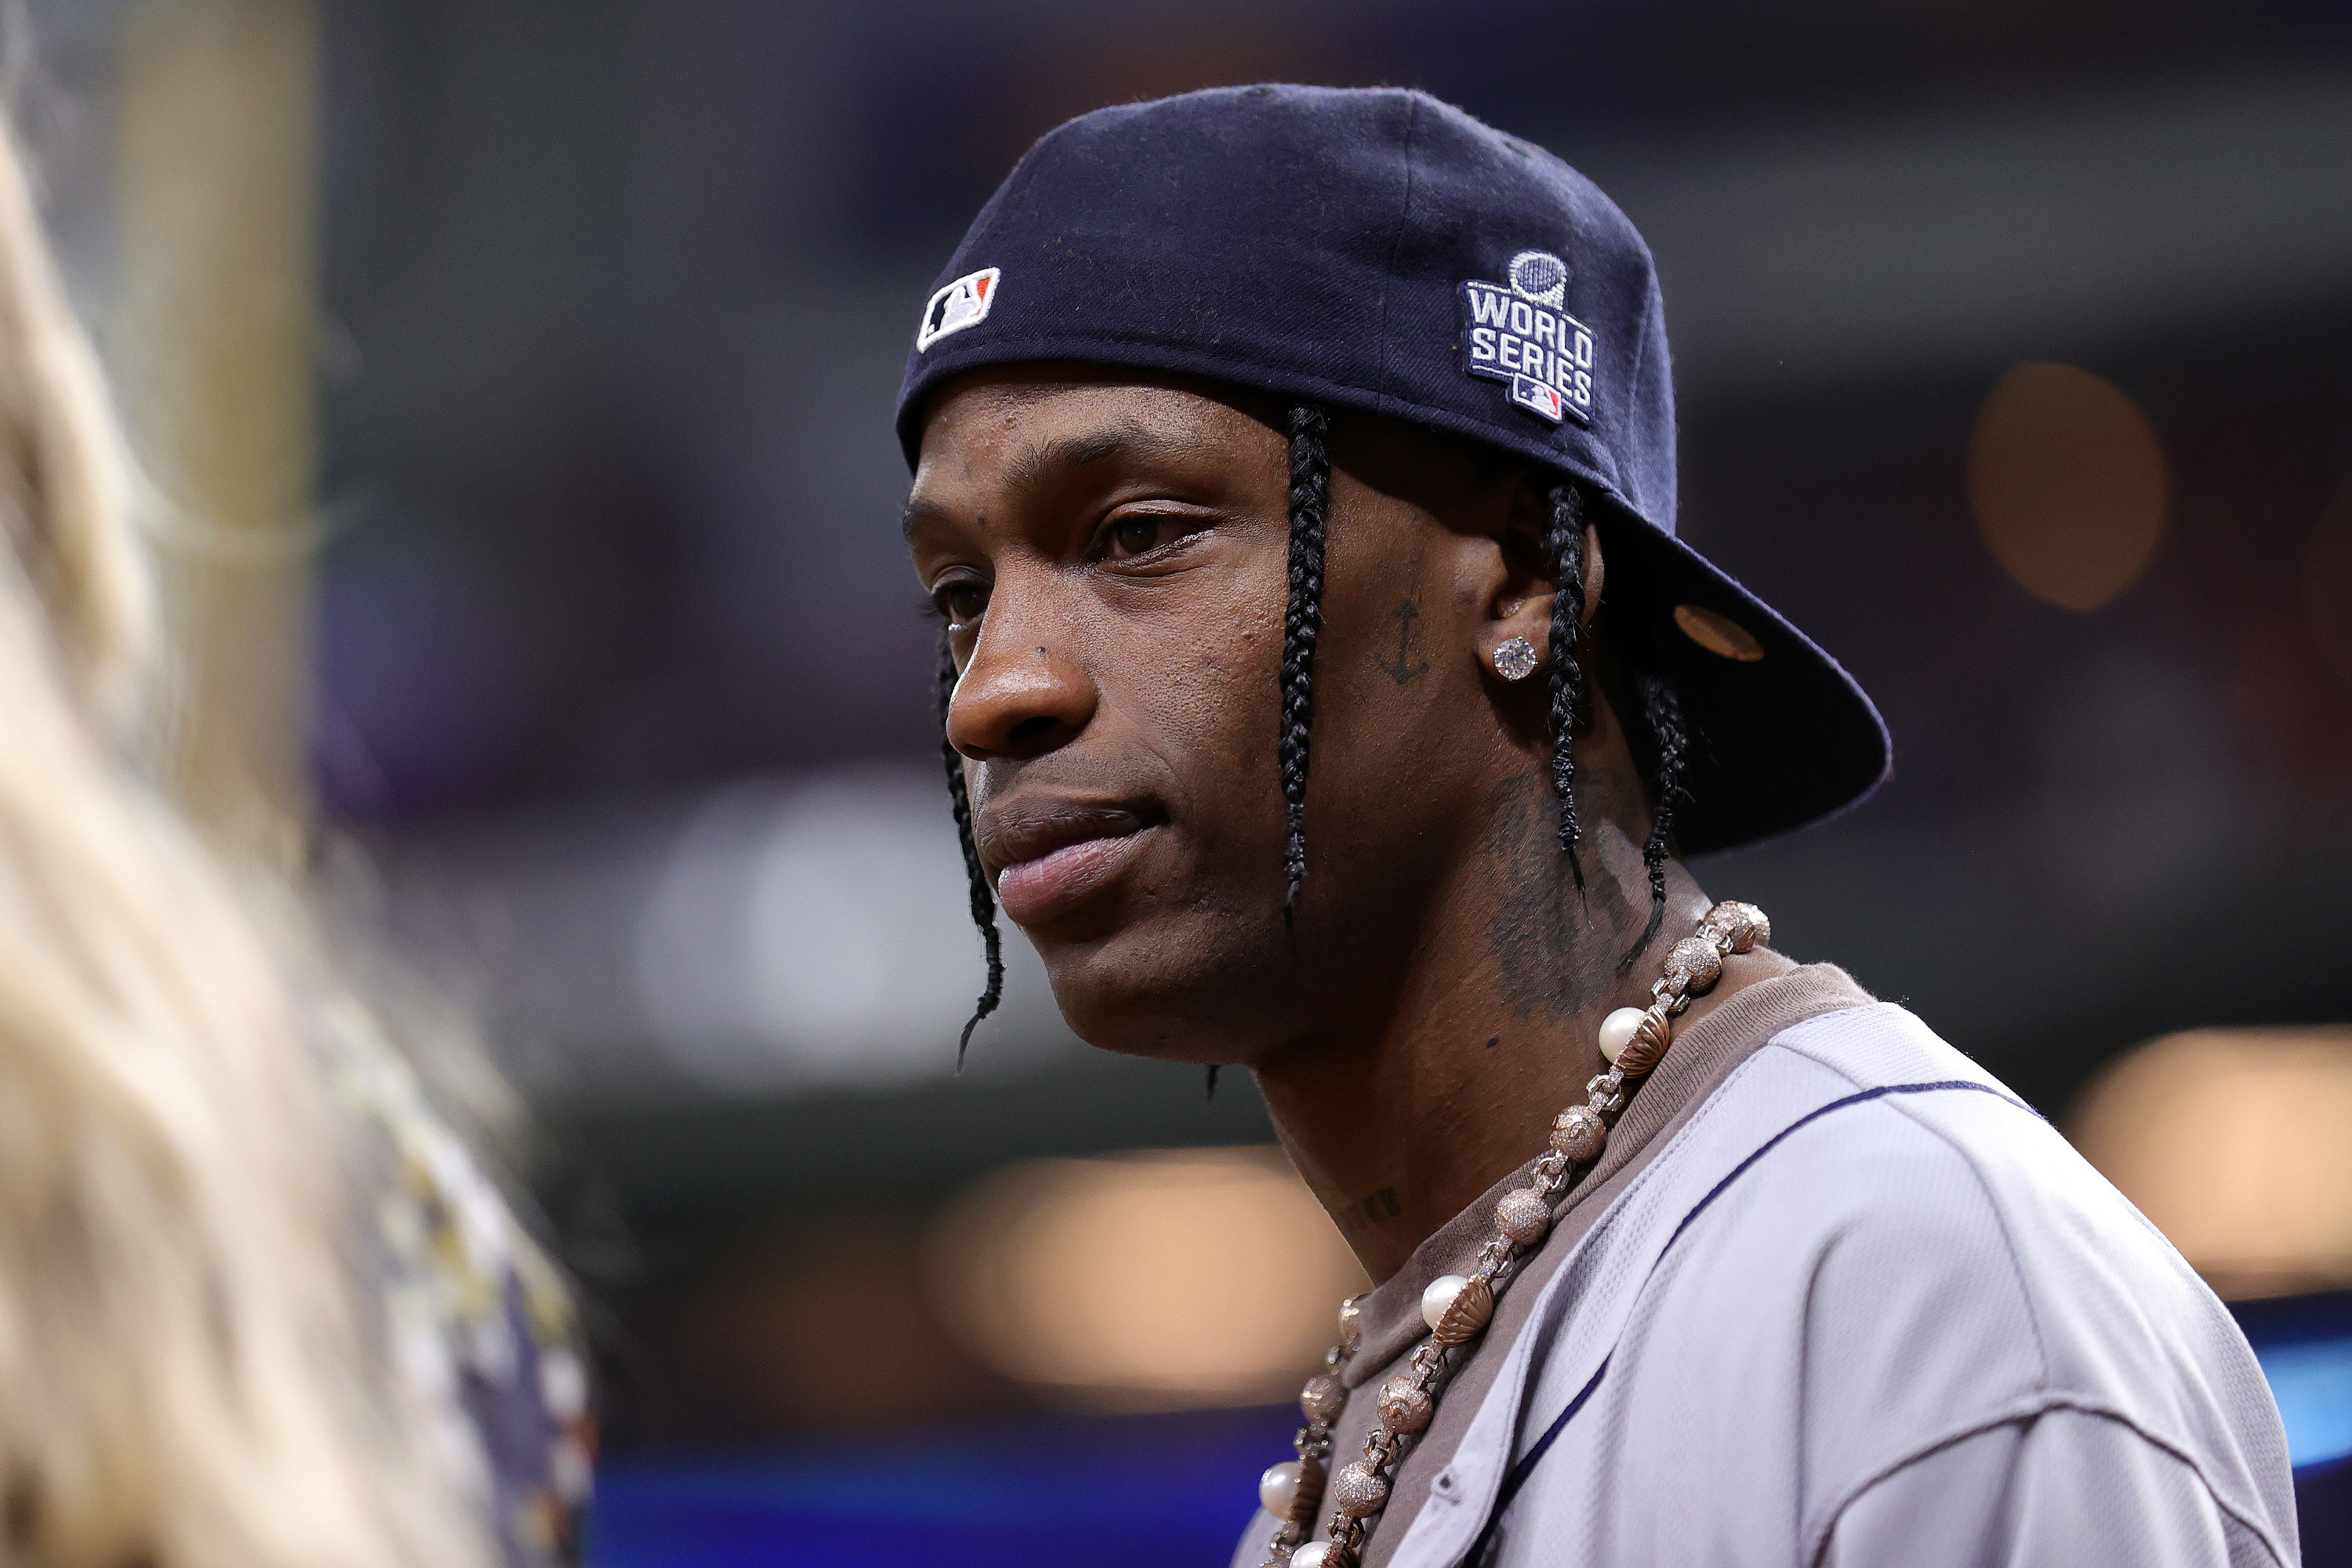 Travis Scott and Dior Have Erased “Collab” From the Dictionary